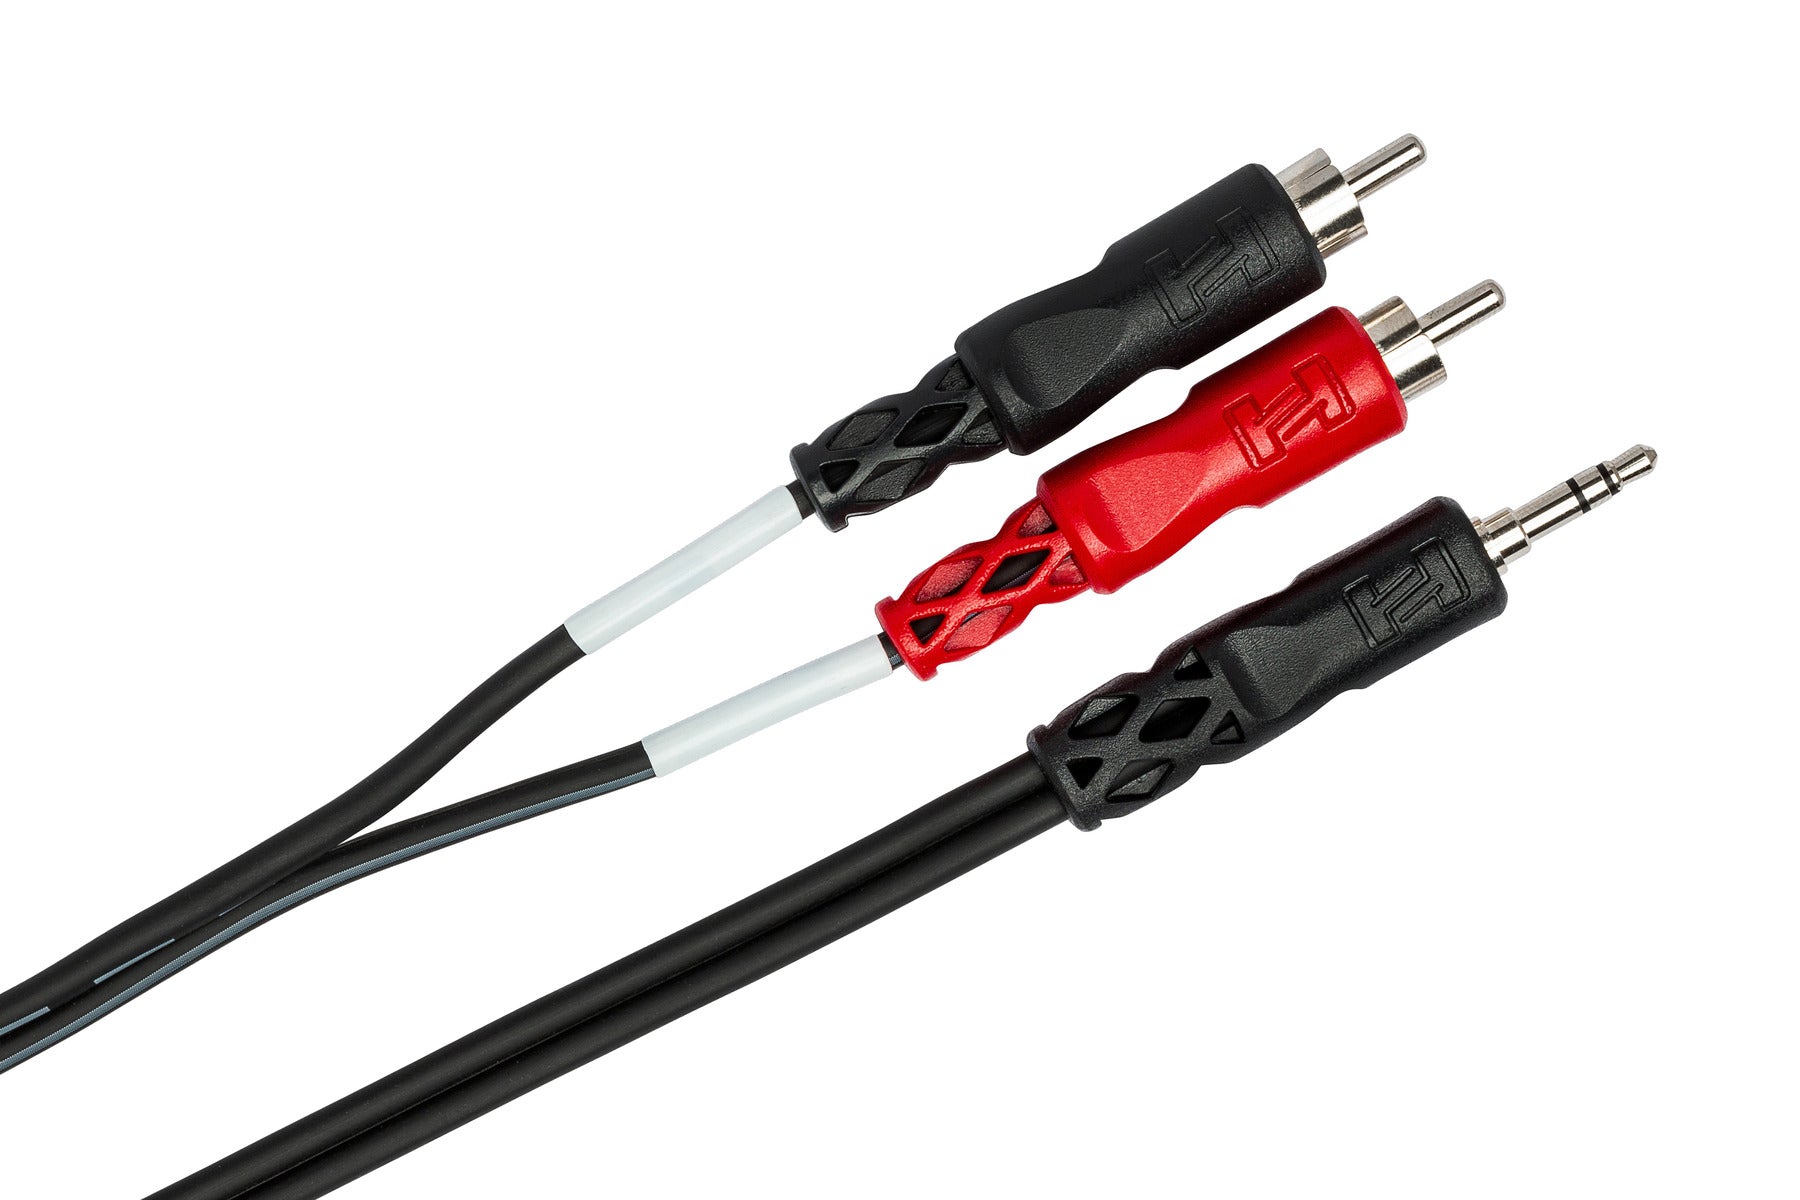 Hosa CMR-206 Stereo Breakout, 3.5 mm TRS to Dual RCA, 6 ft